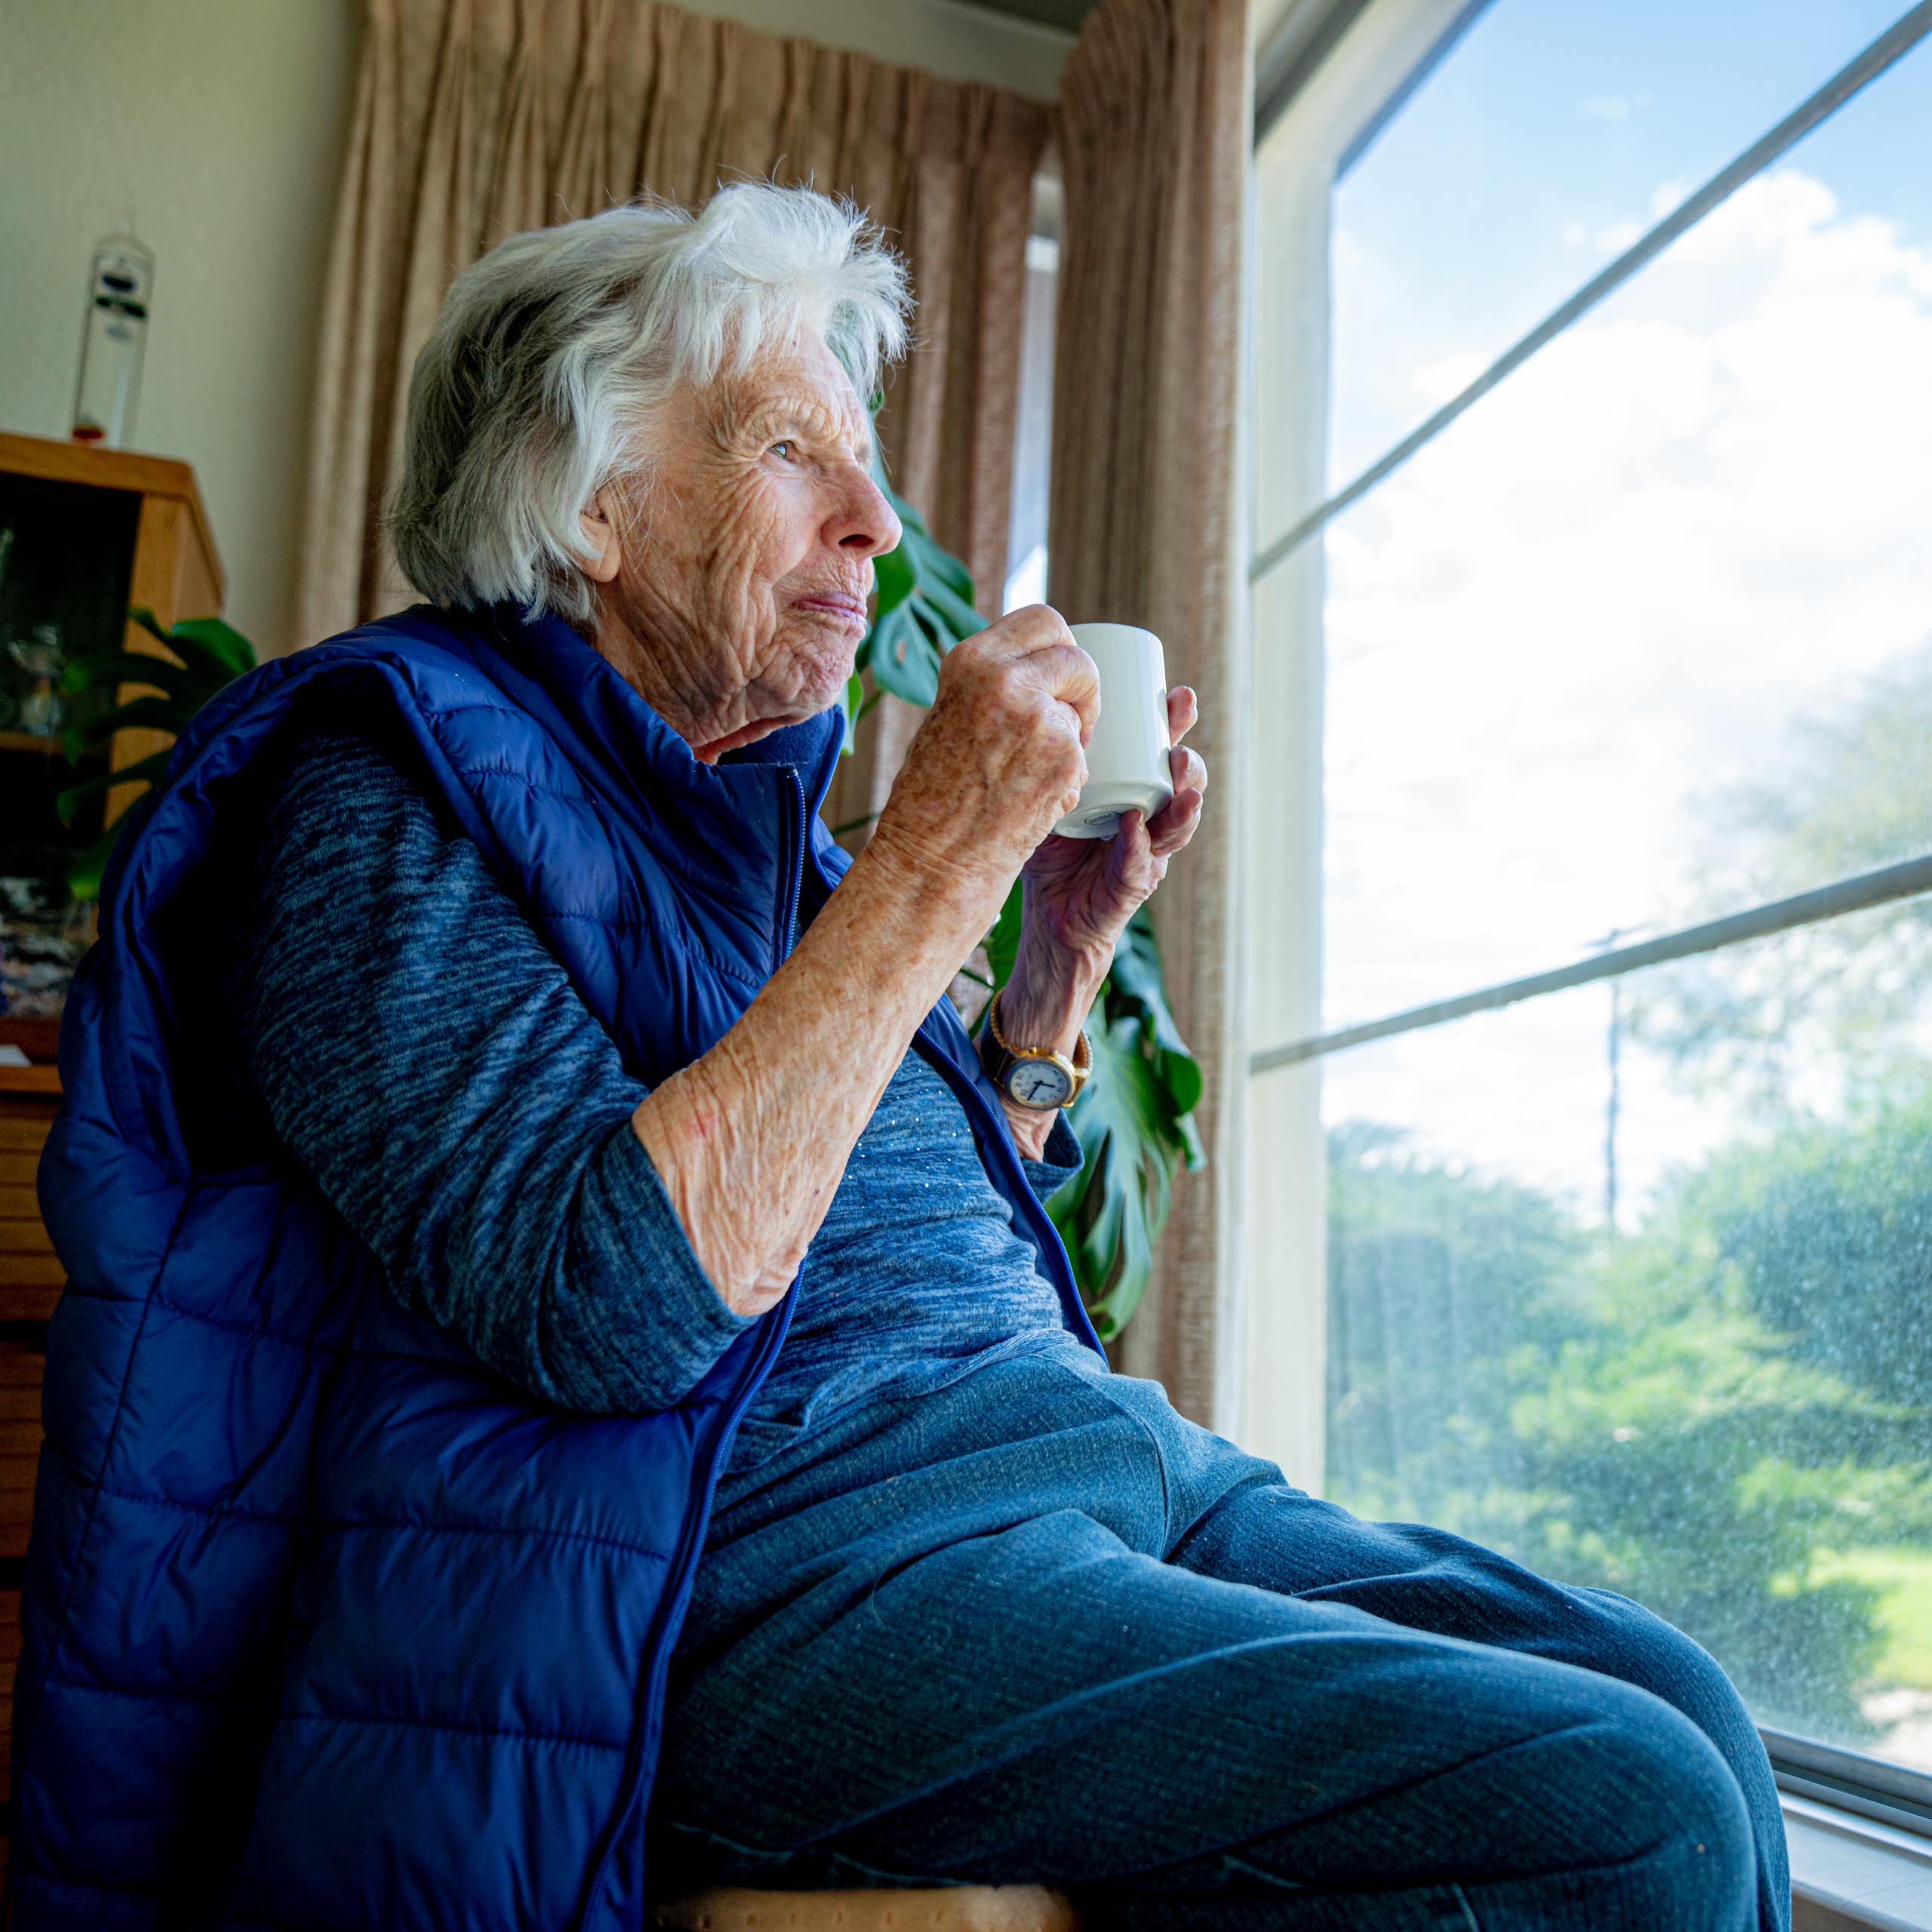 Cheerful older woman holds a mug while looking out the window, enjoying the view in the summertime.